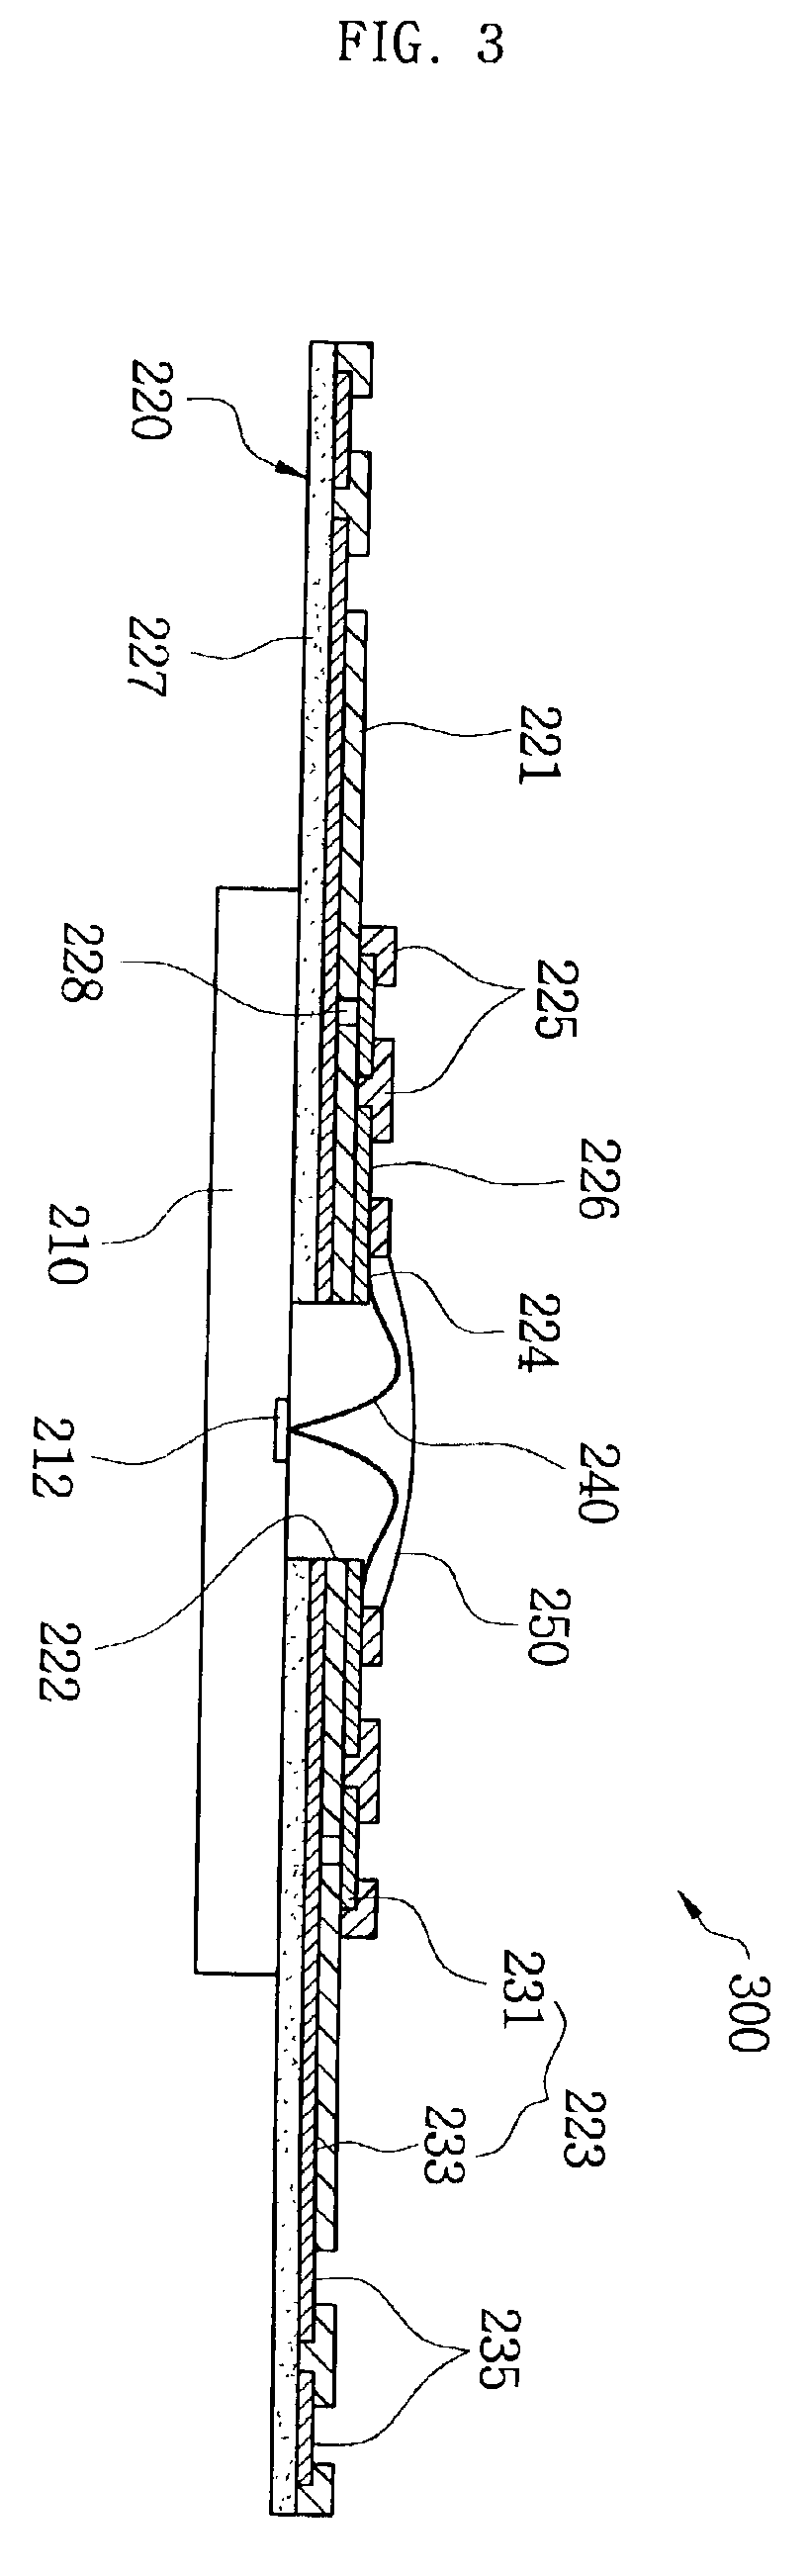 Stack package using flexible double wiring substrate